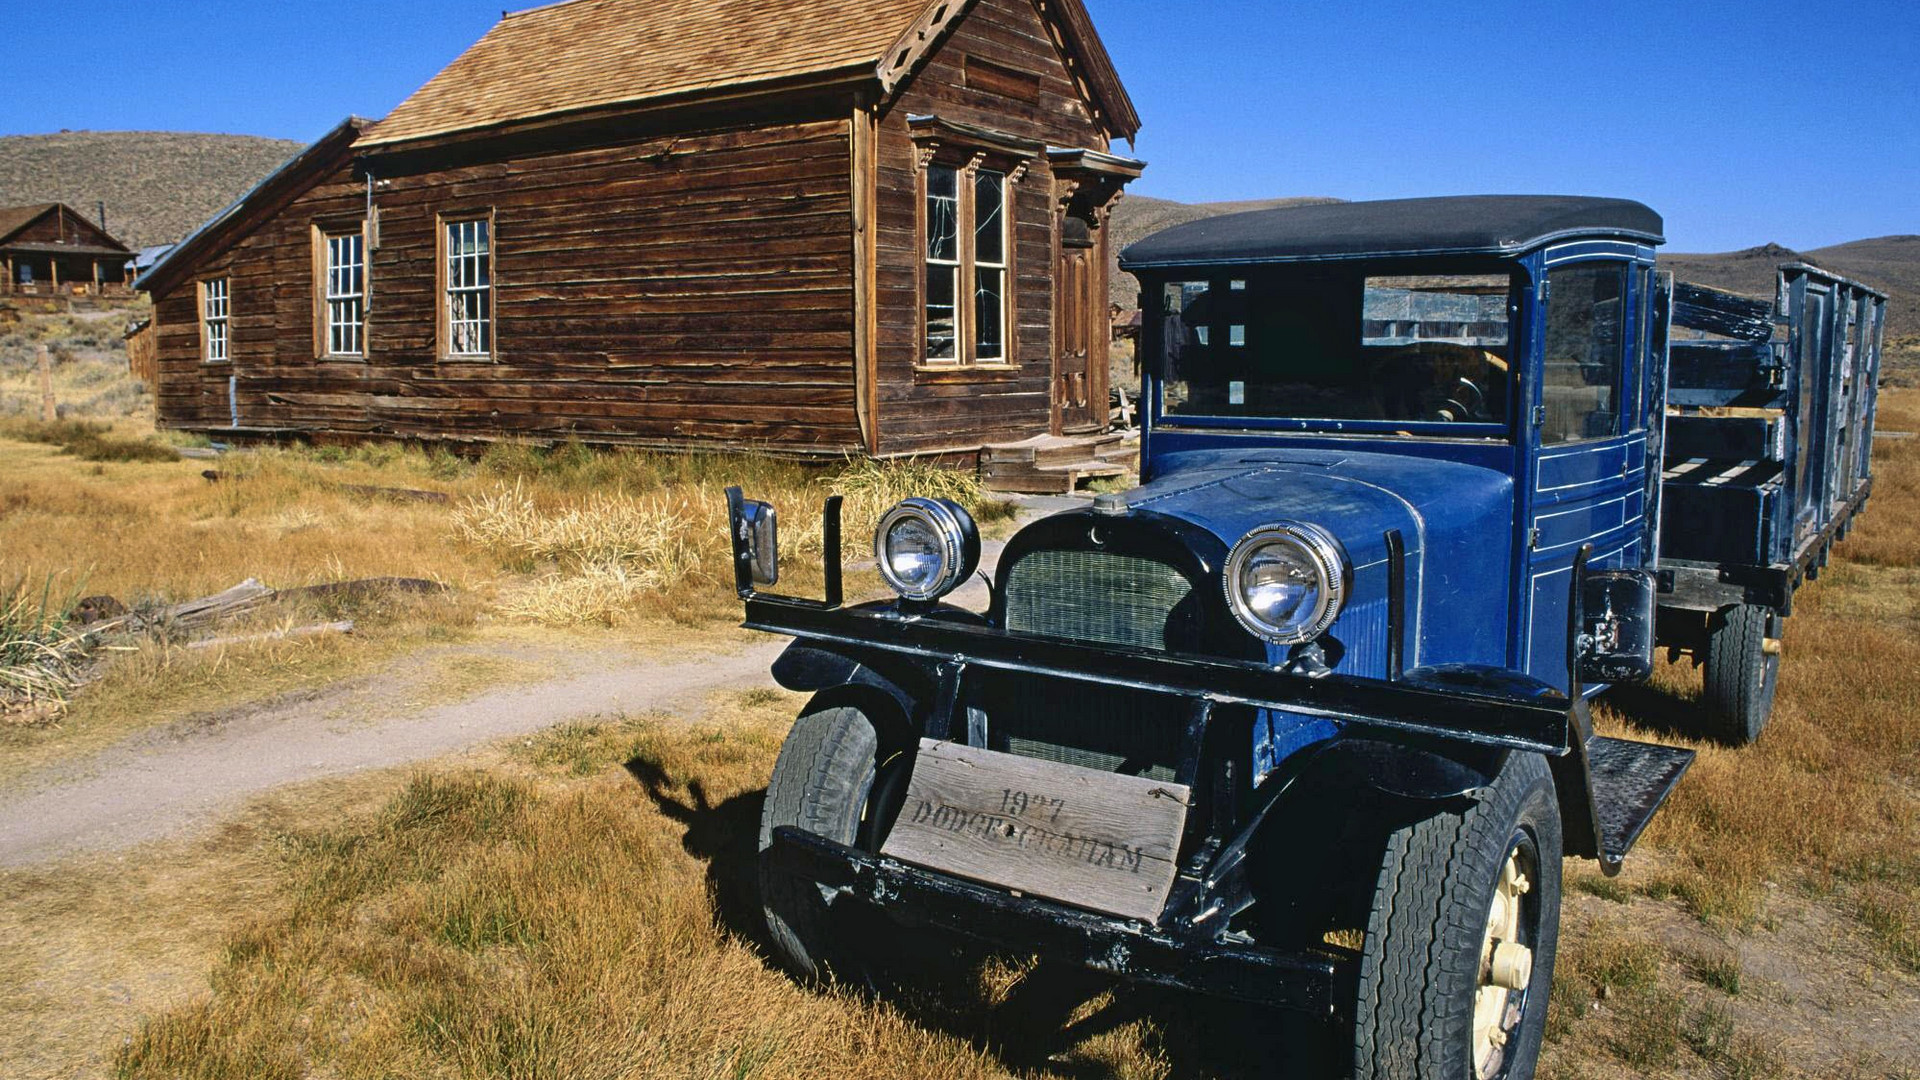 1937 Dodge Truck and Post Office, Bodie State Historic Park, CA.jpg